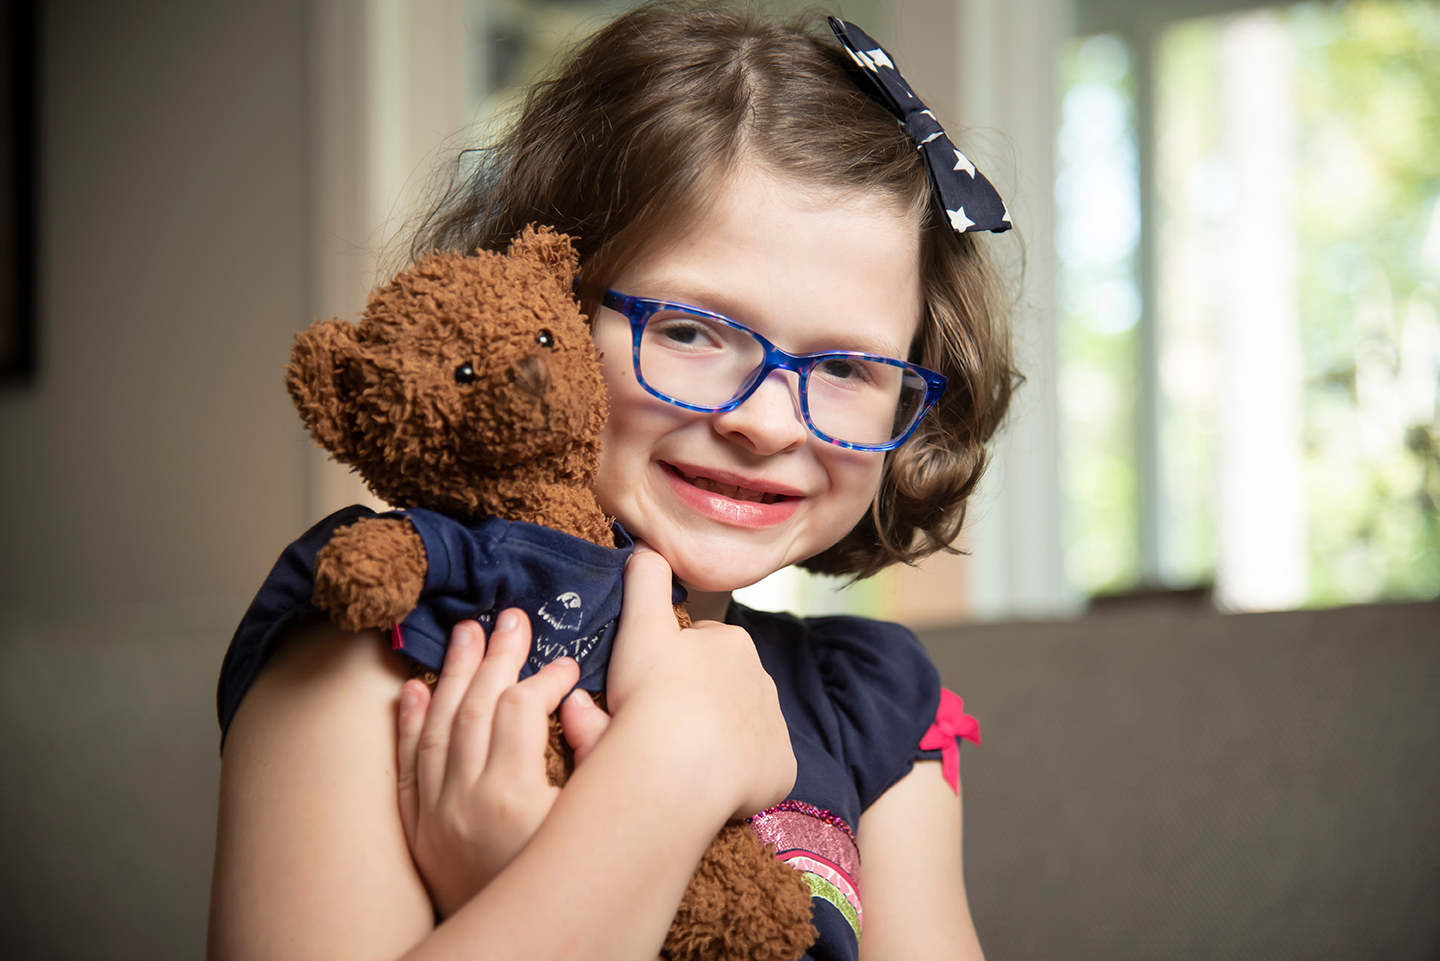 A little girl with glasses holding a stuffed bear